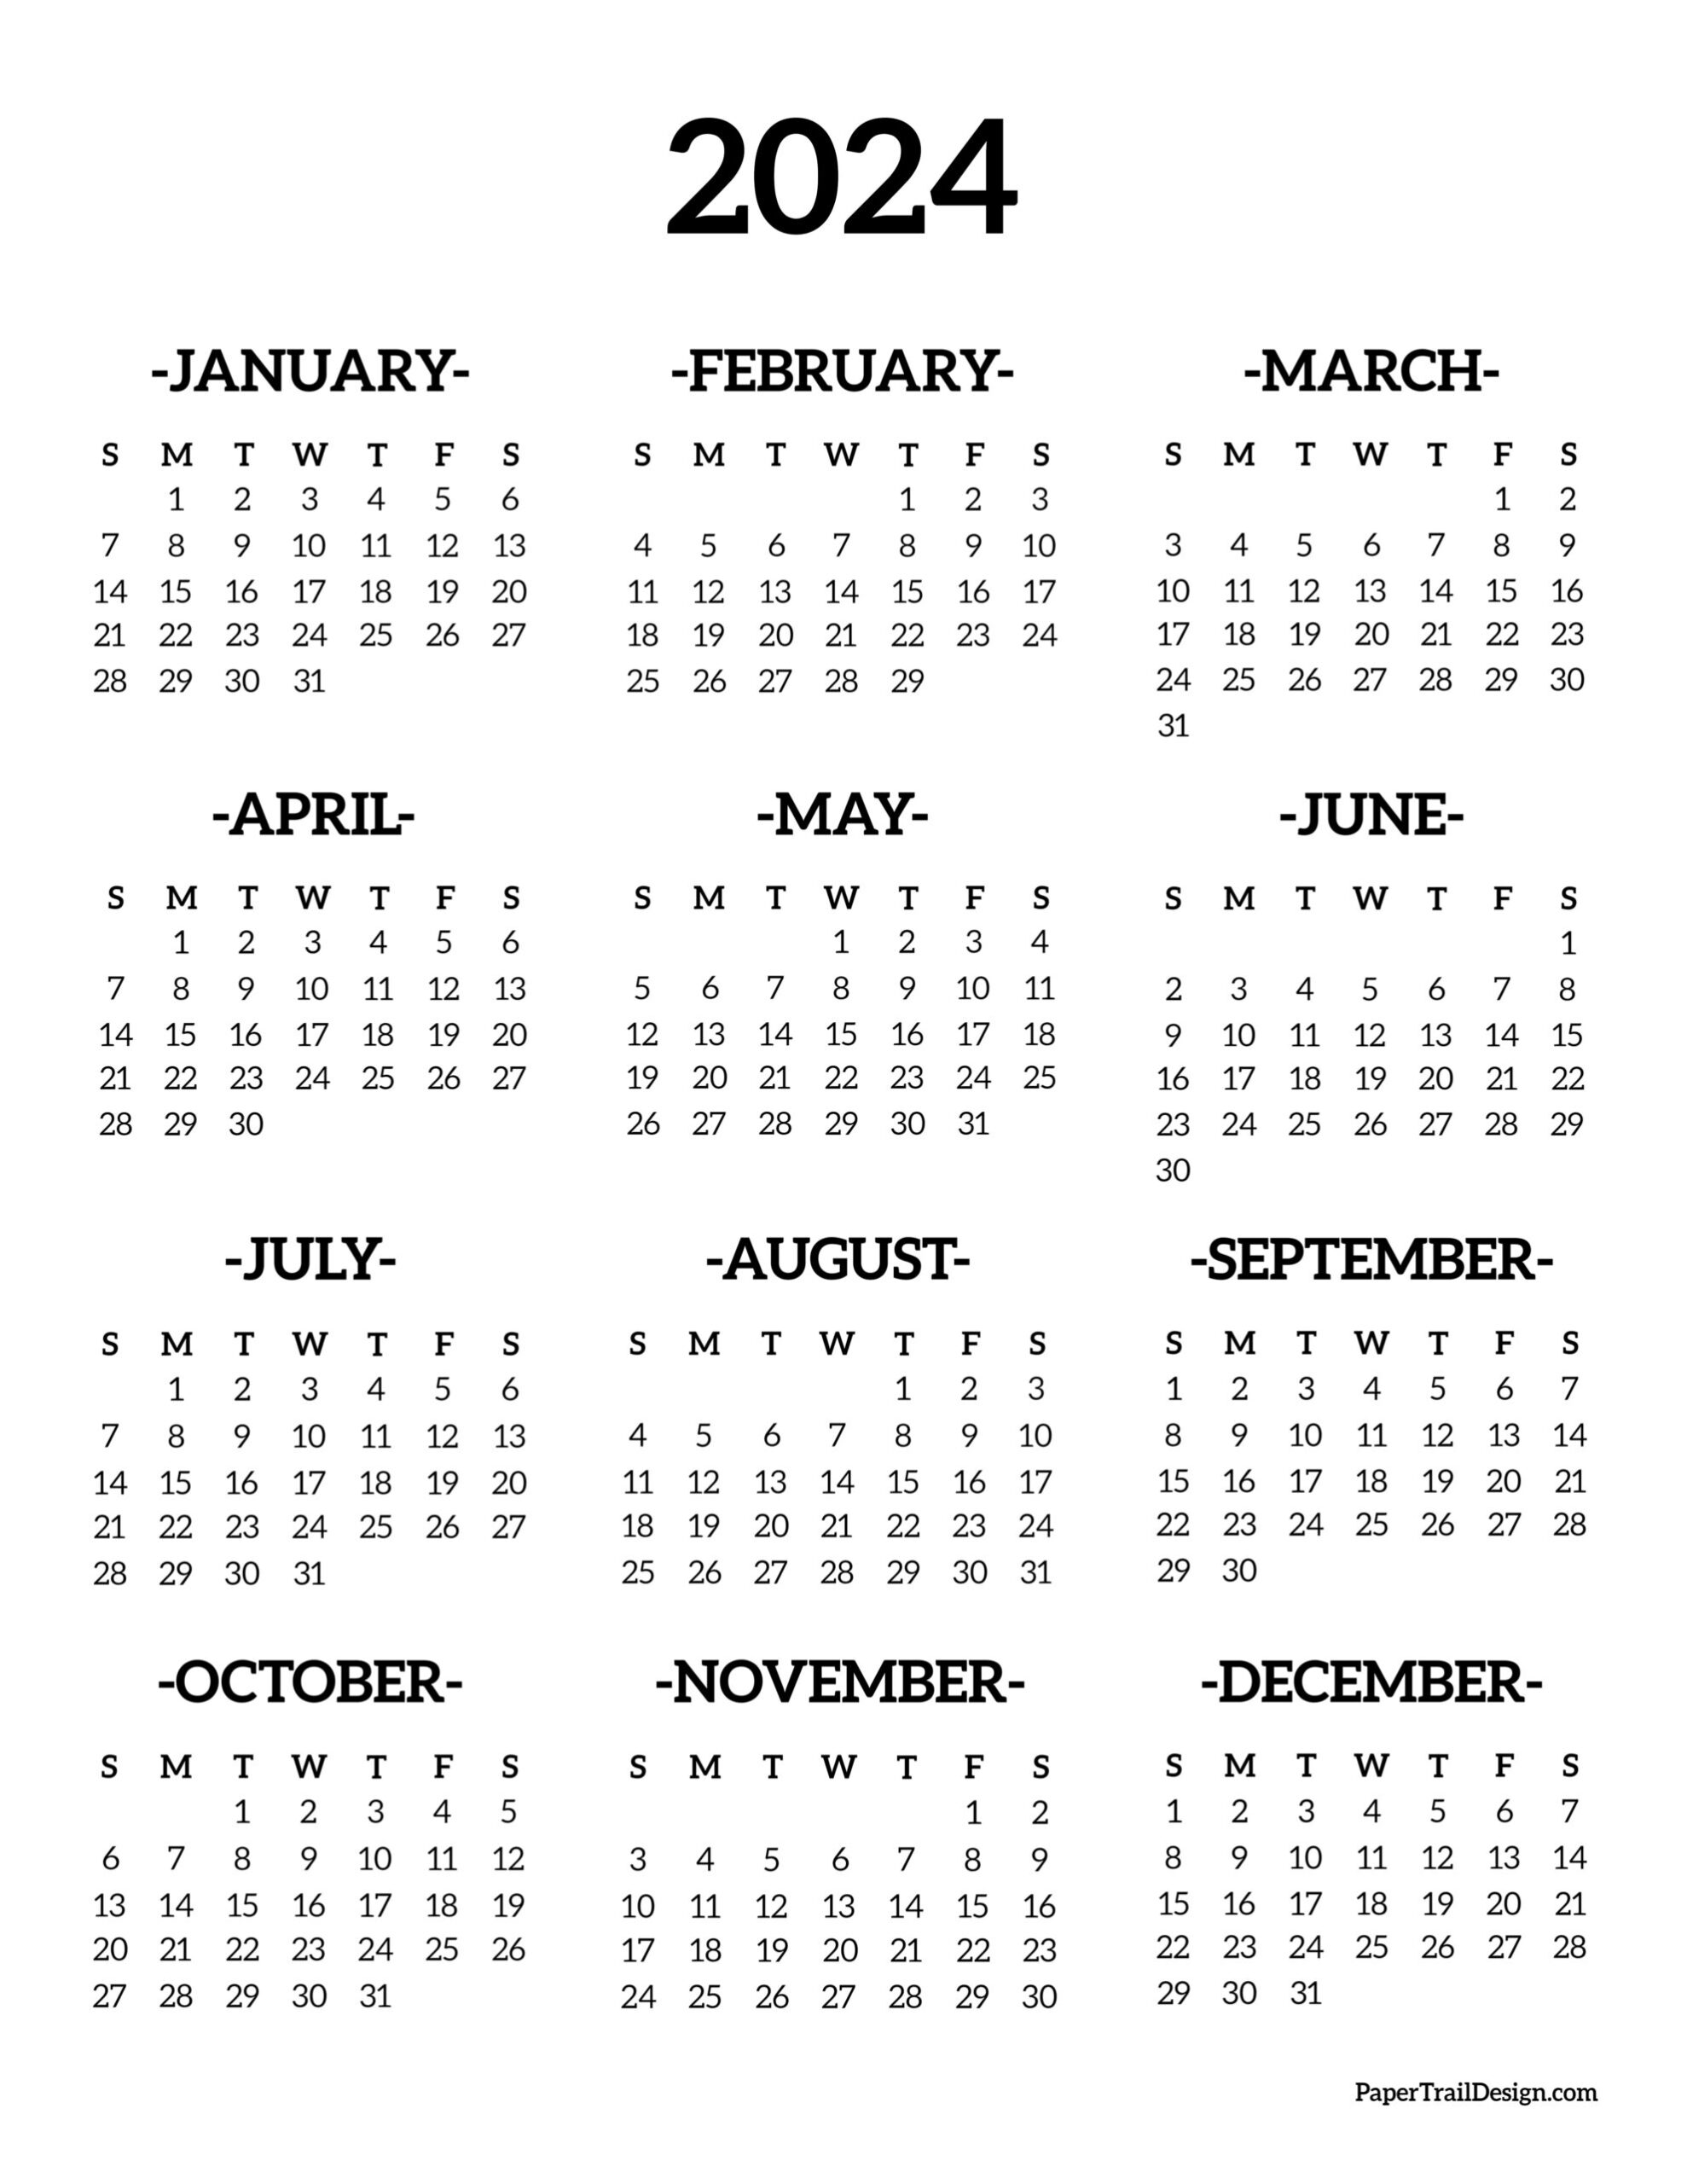 Calendar 2024 Printable One Page - Paper Trail Design for Free Printable Annual Calendar 2024